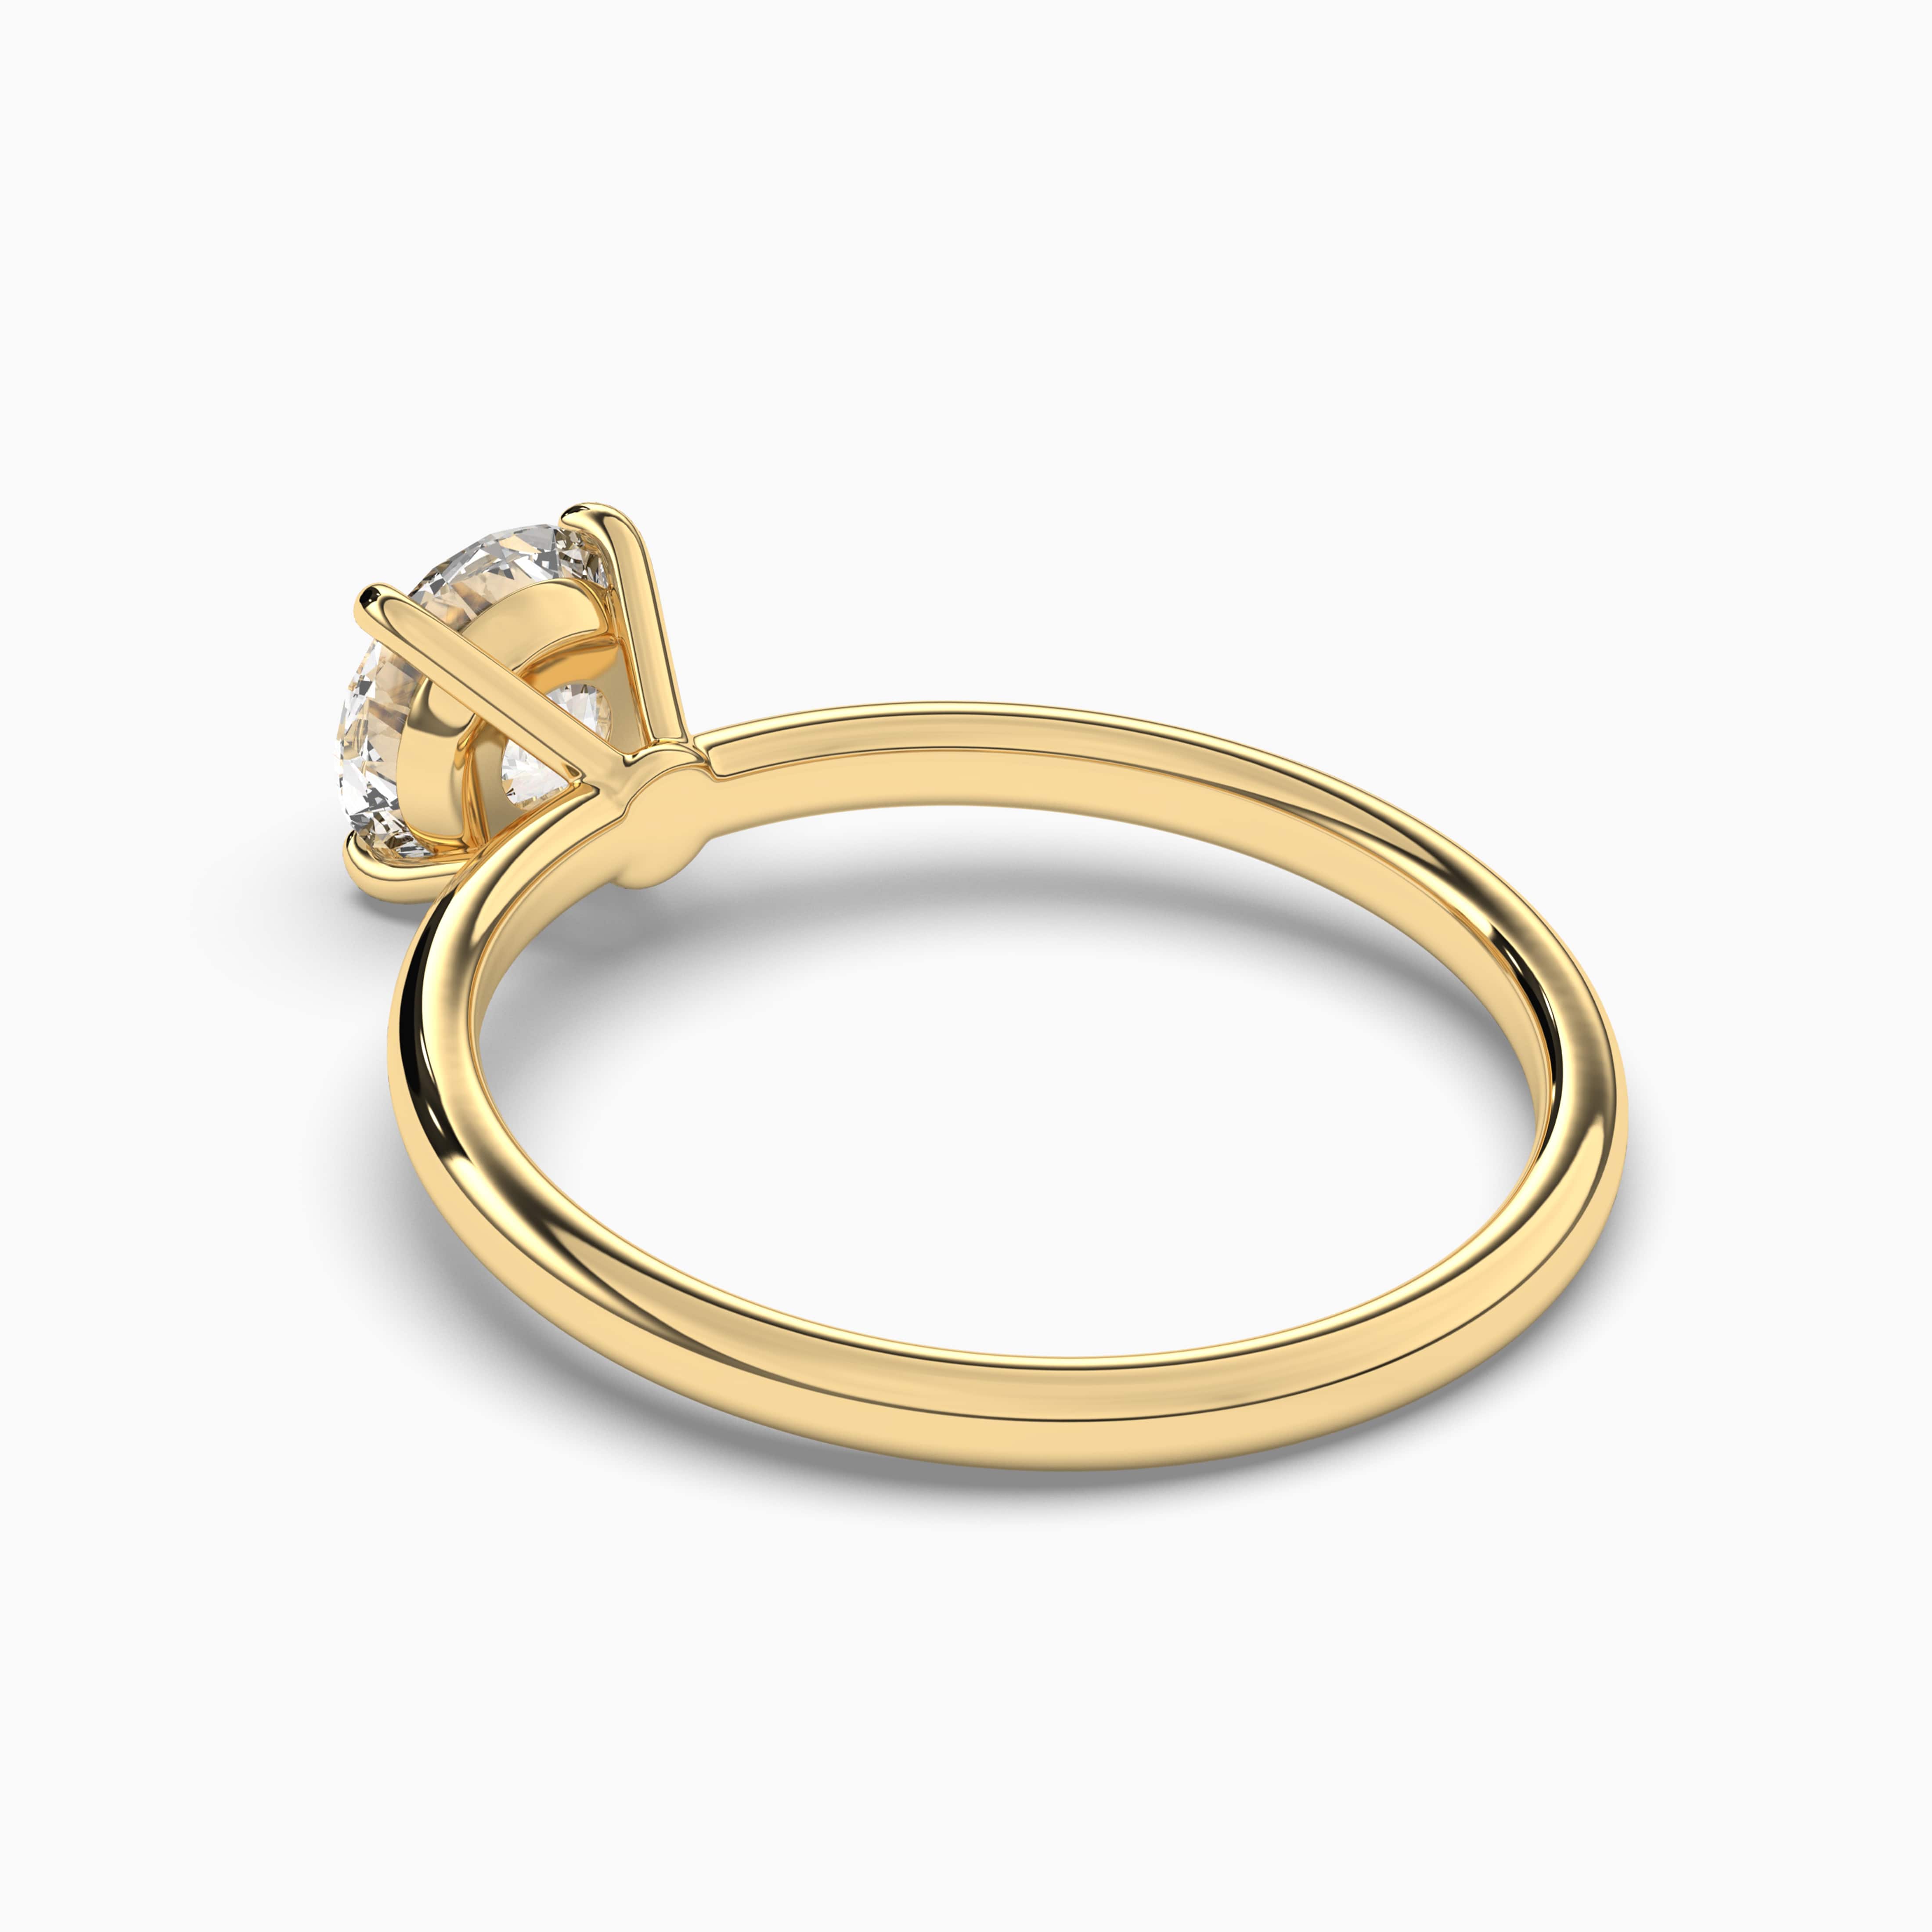 Yellow gold solitaire diamond ring